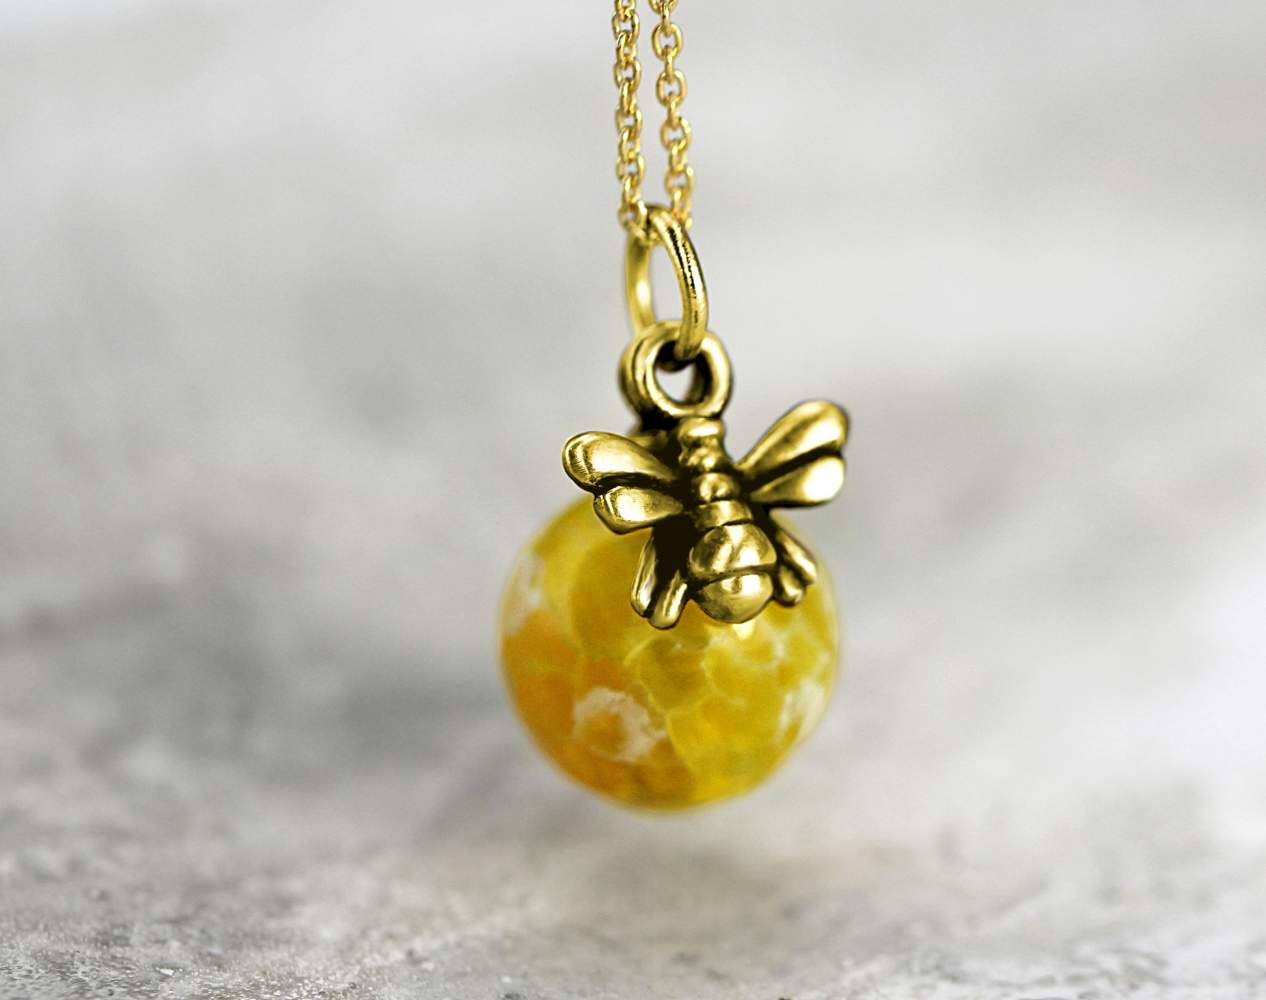 Bee honeycomb necklace. Gold plated sterling